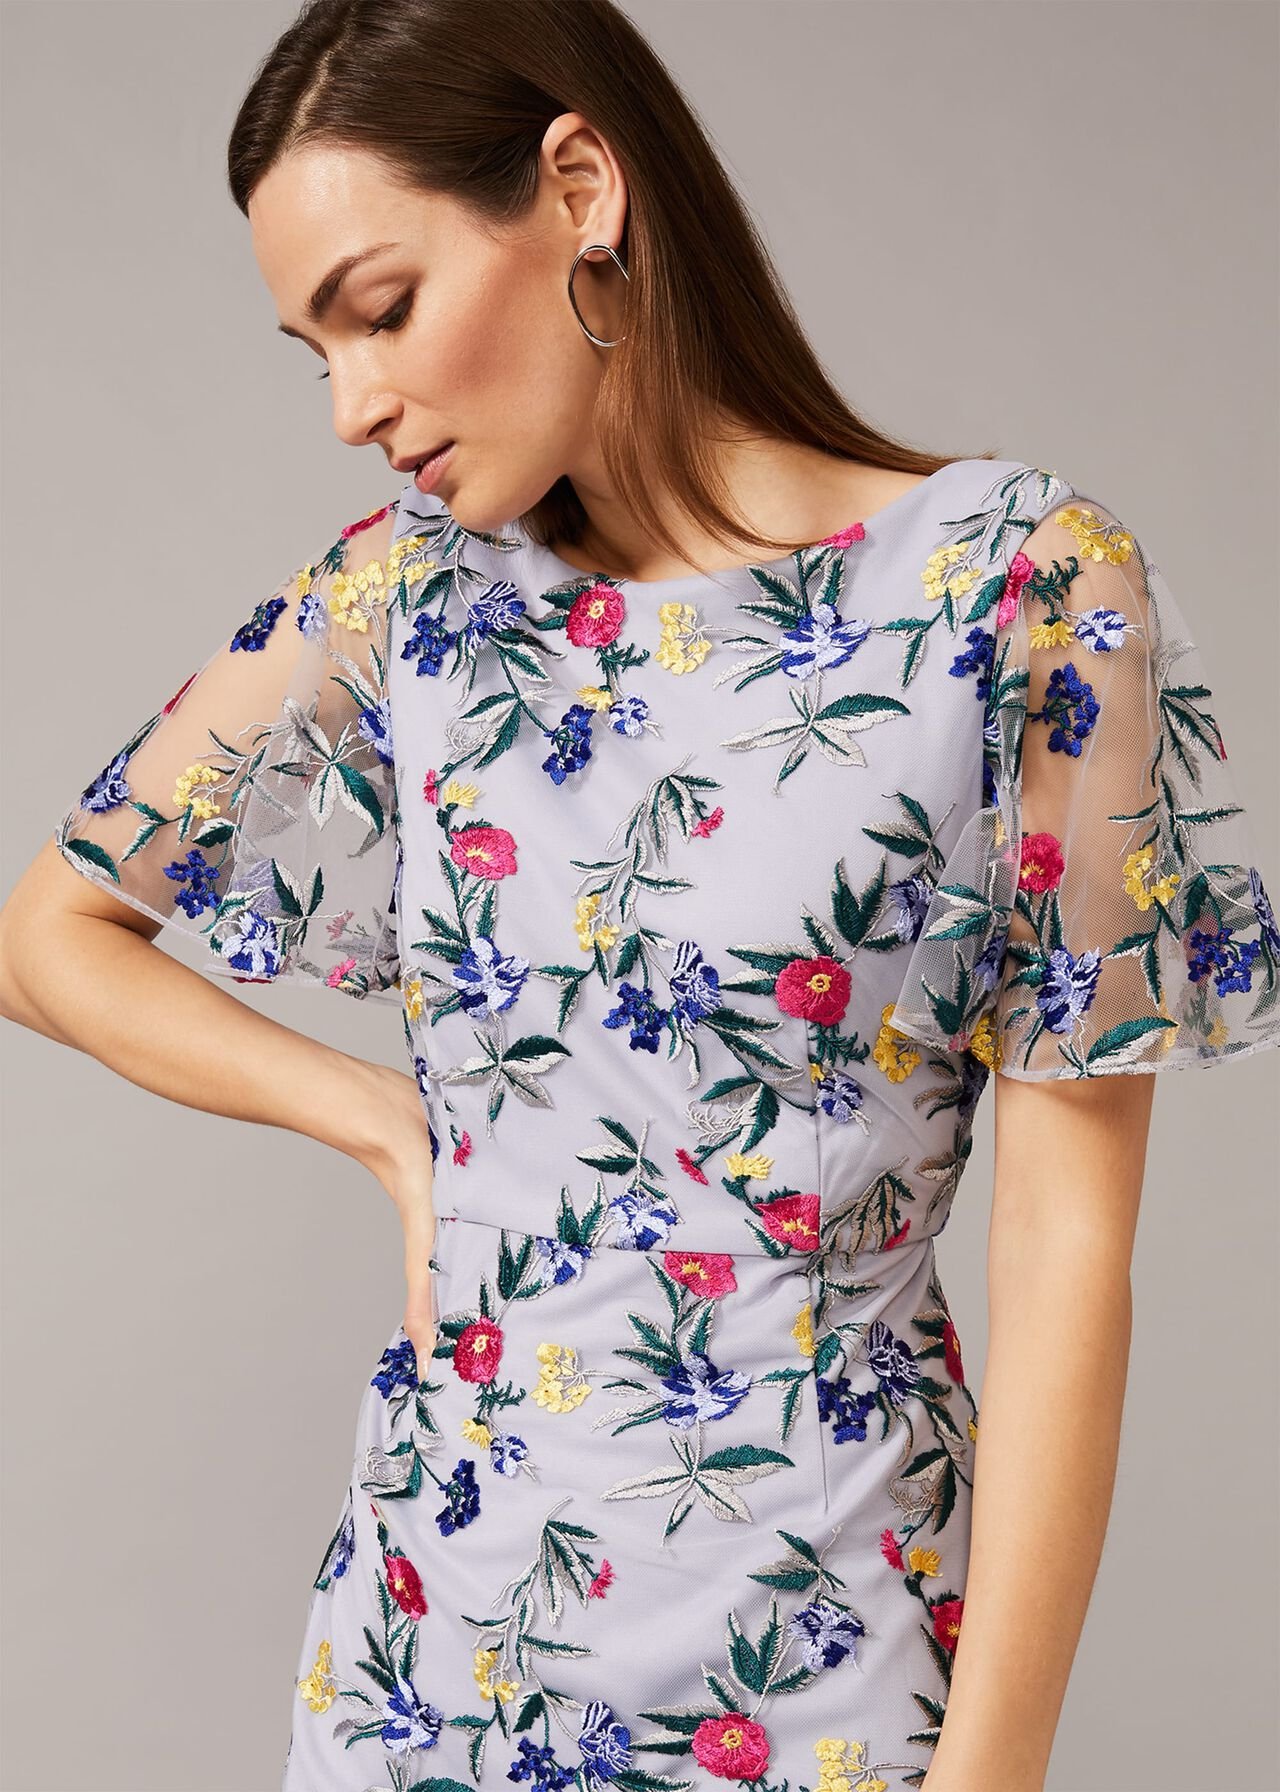 Lorie Floral Embroidered Dress